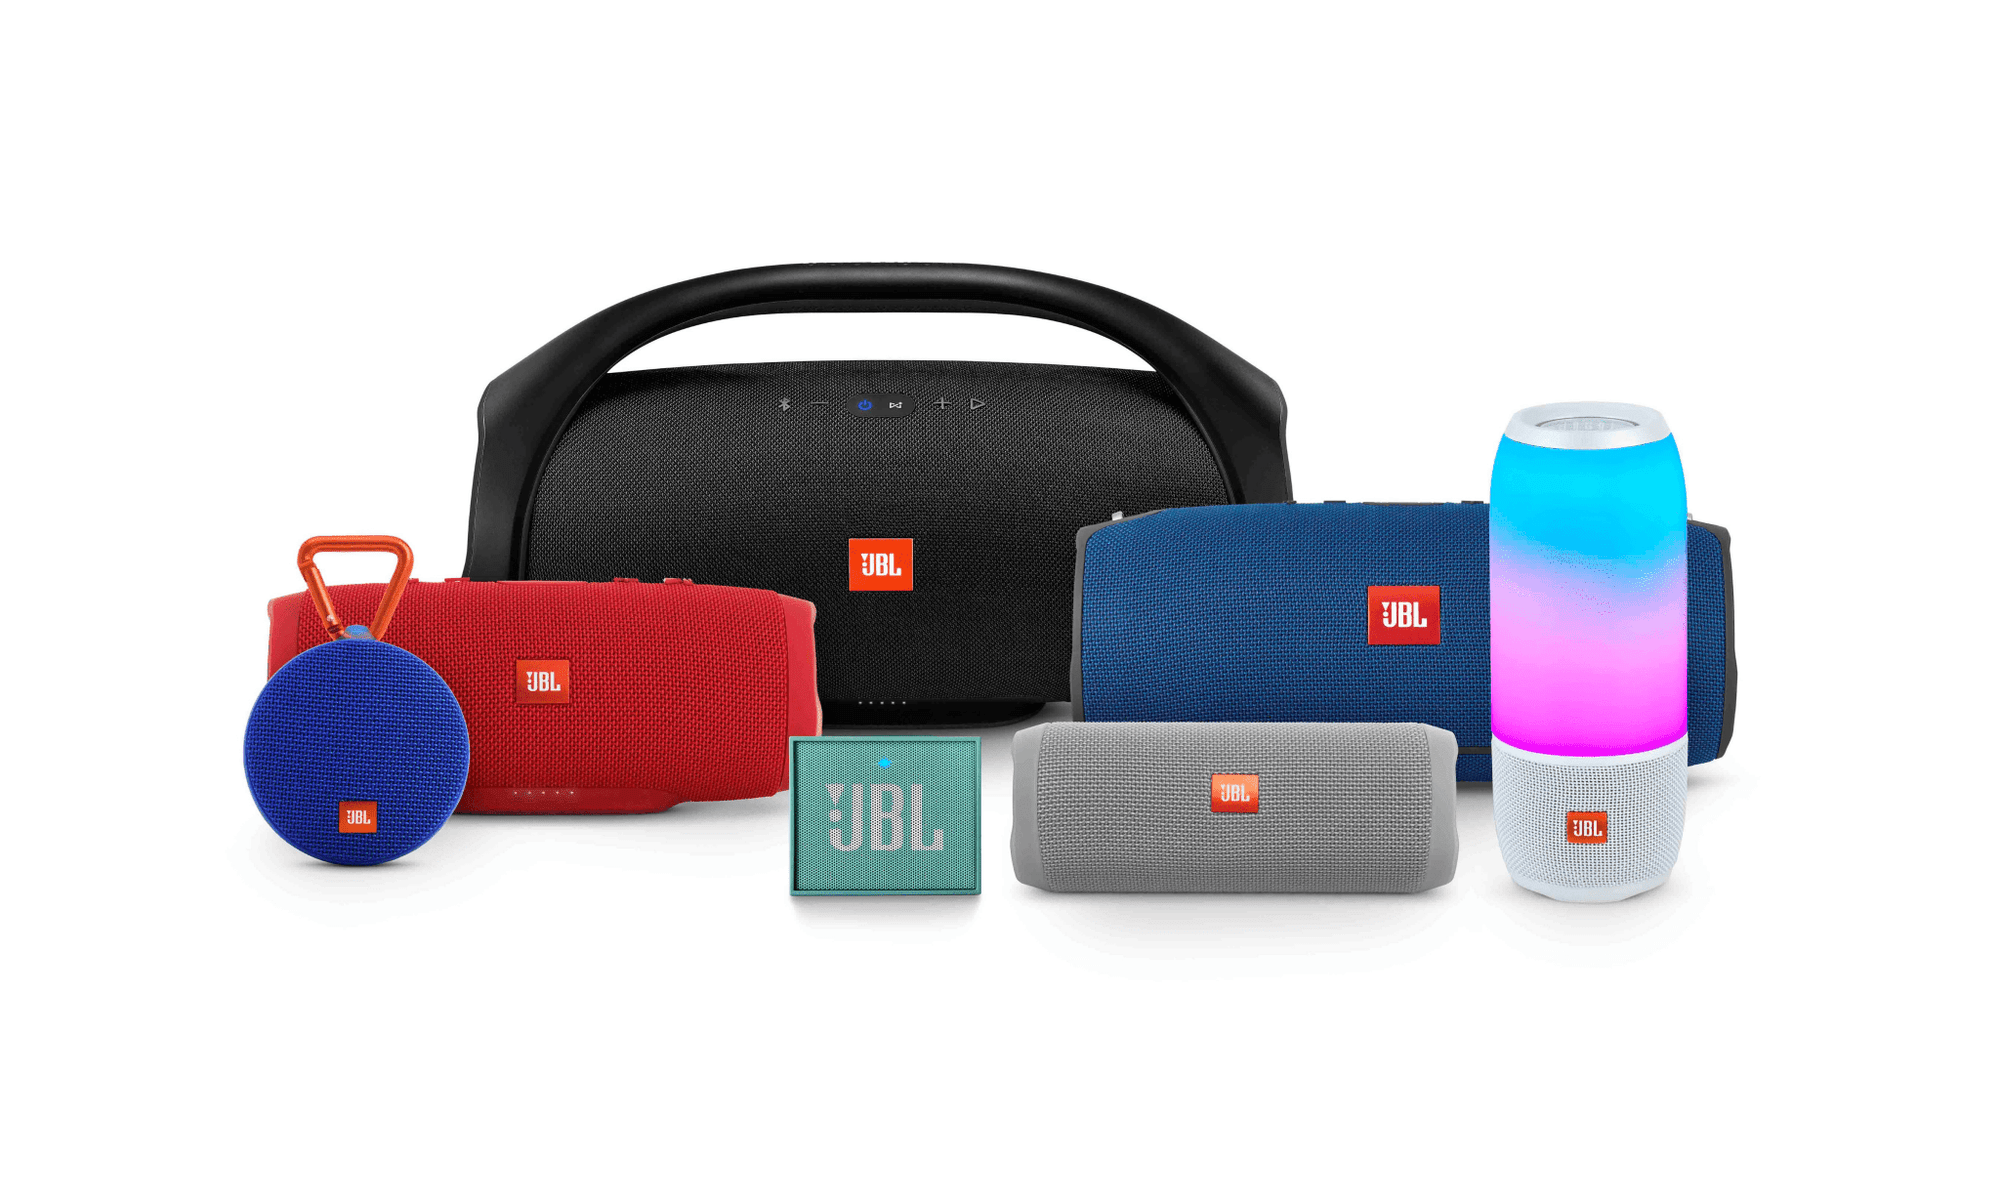 Discover the Freedom of Sound with JBL Portable Bluetooth Speakers